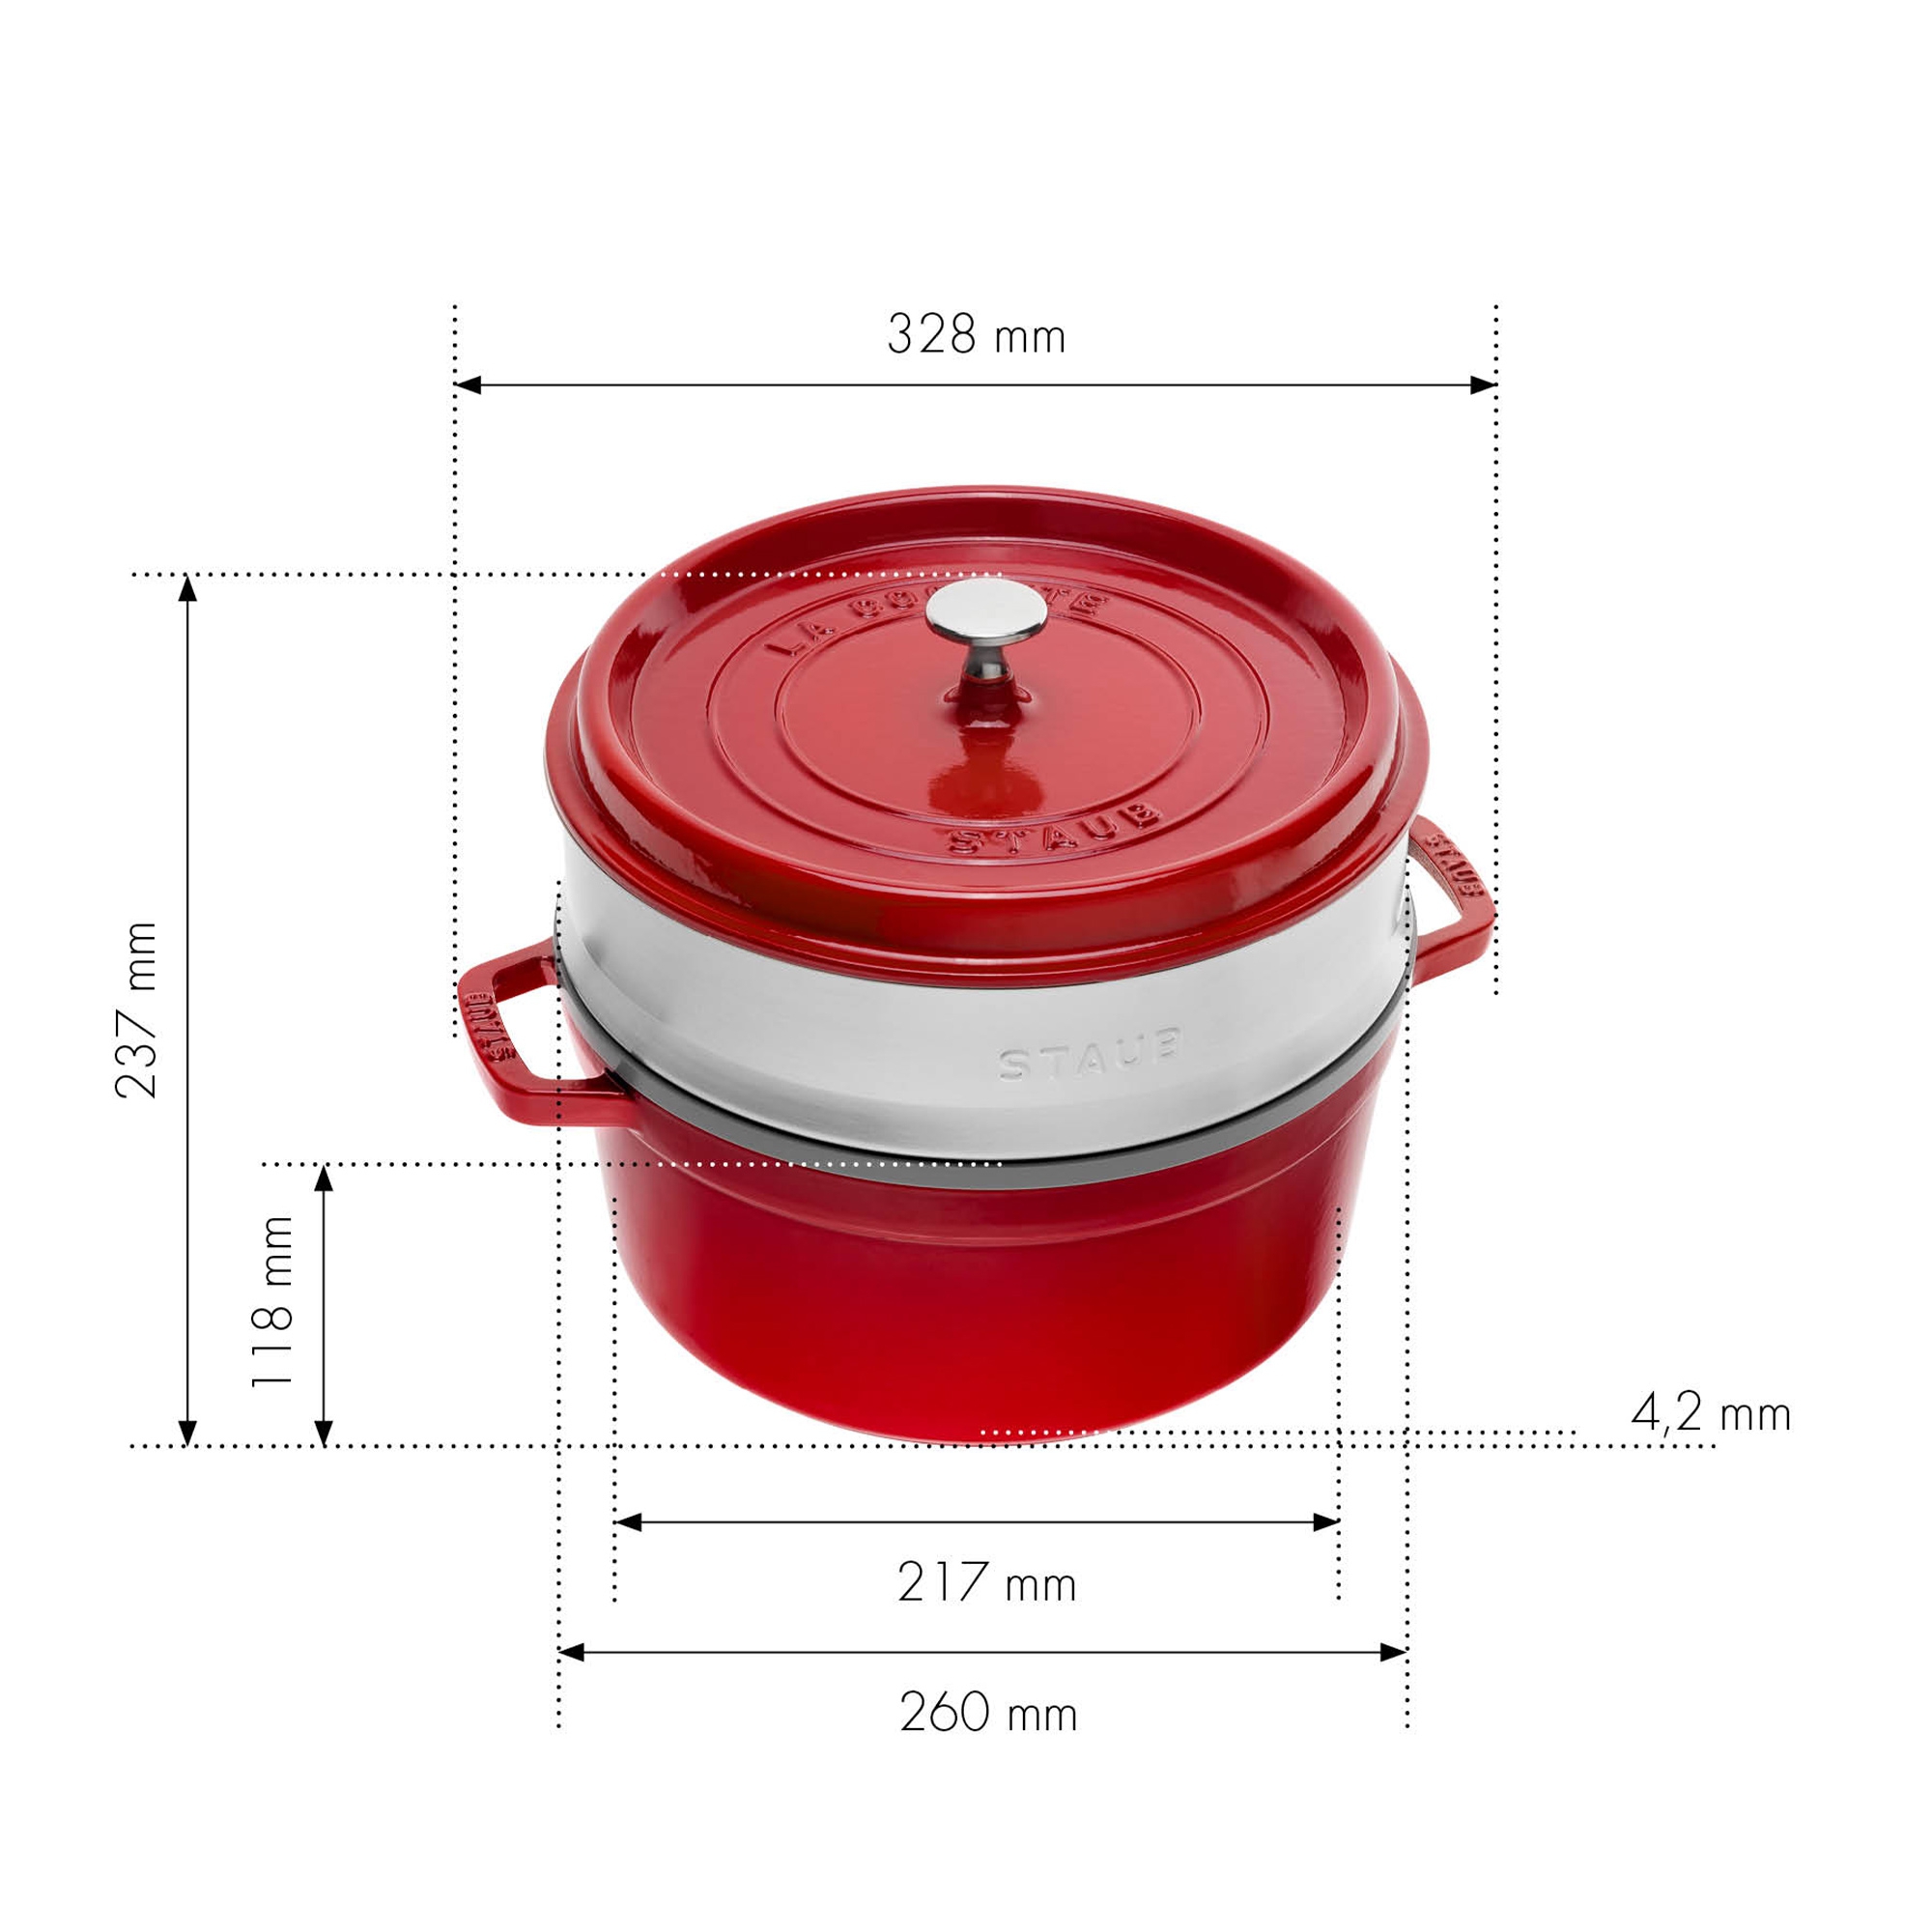 Staub - Cocotte with steaming basket - round - 26 cm